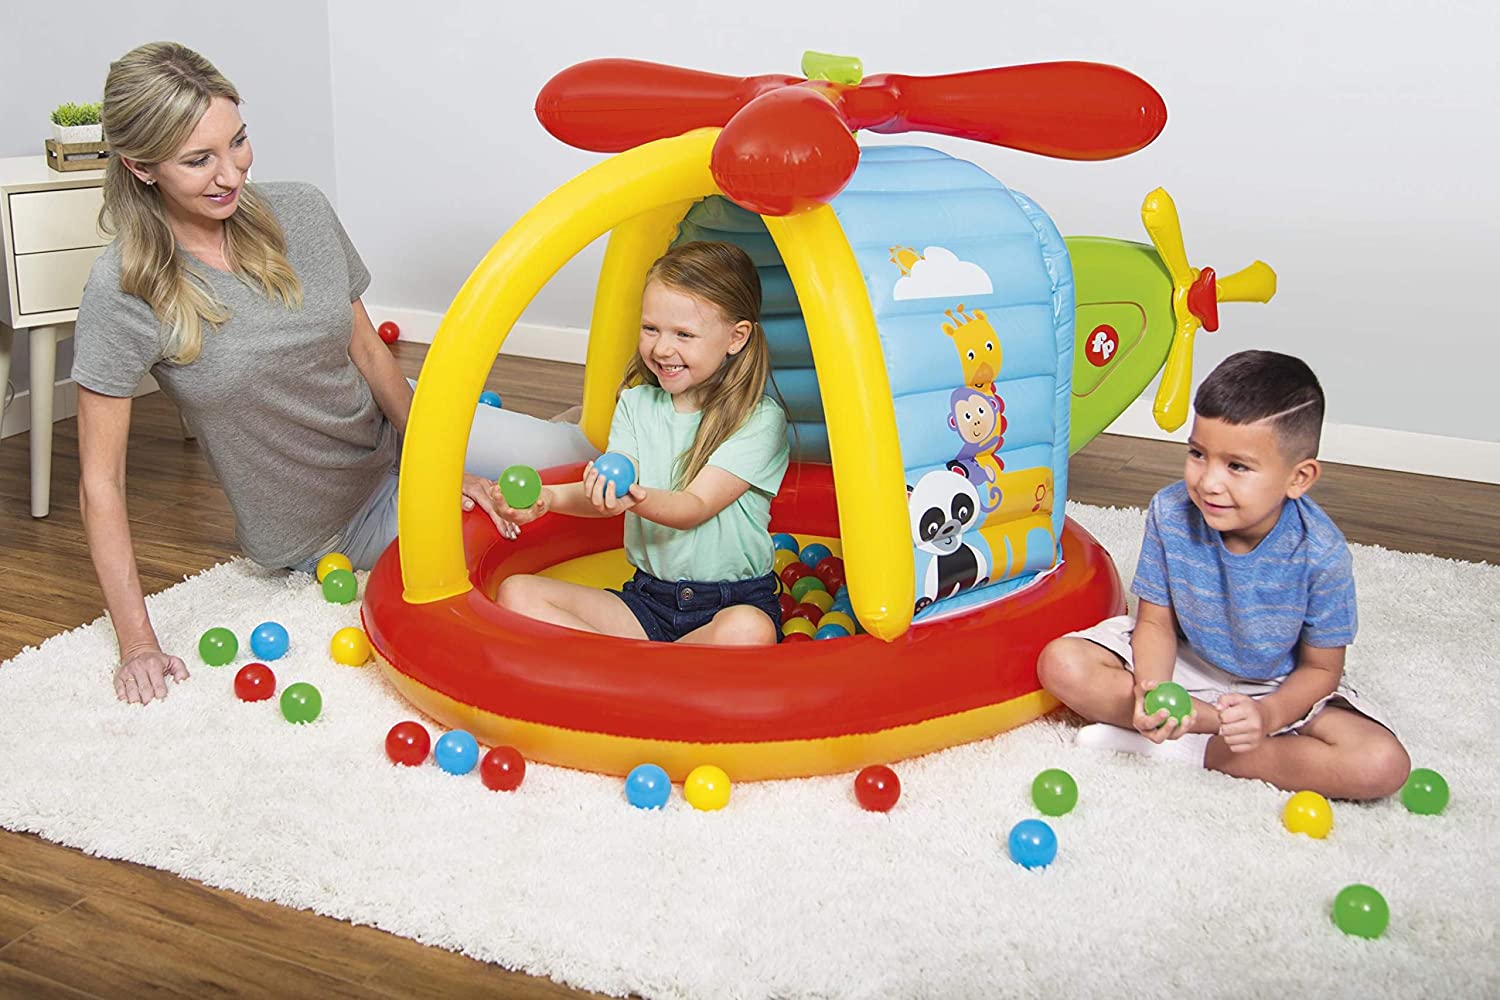 Bestway - Helicopter Ball Pit (61" x 40" x 36" / 1.55m x 1.02m x 91cm)